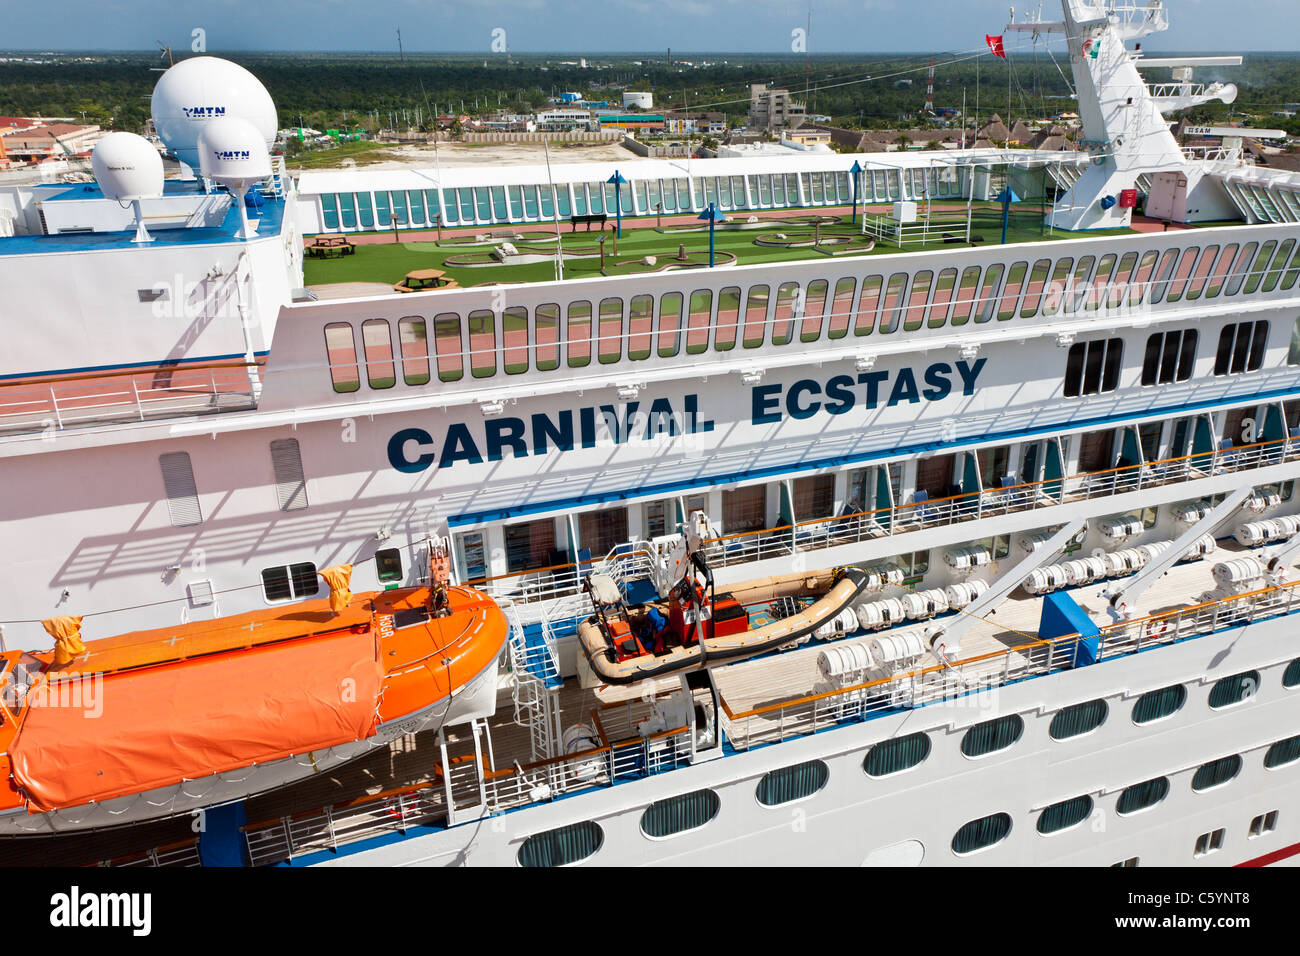 Carnival cruise ship Ecstasy at port in Cozumel, Mexico in the Caribbean Sea Stock Photo